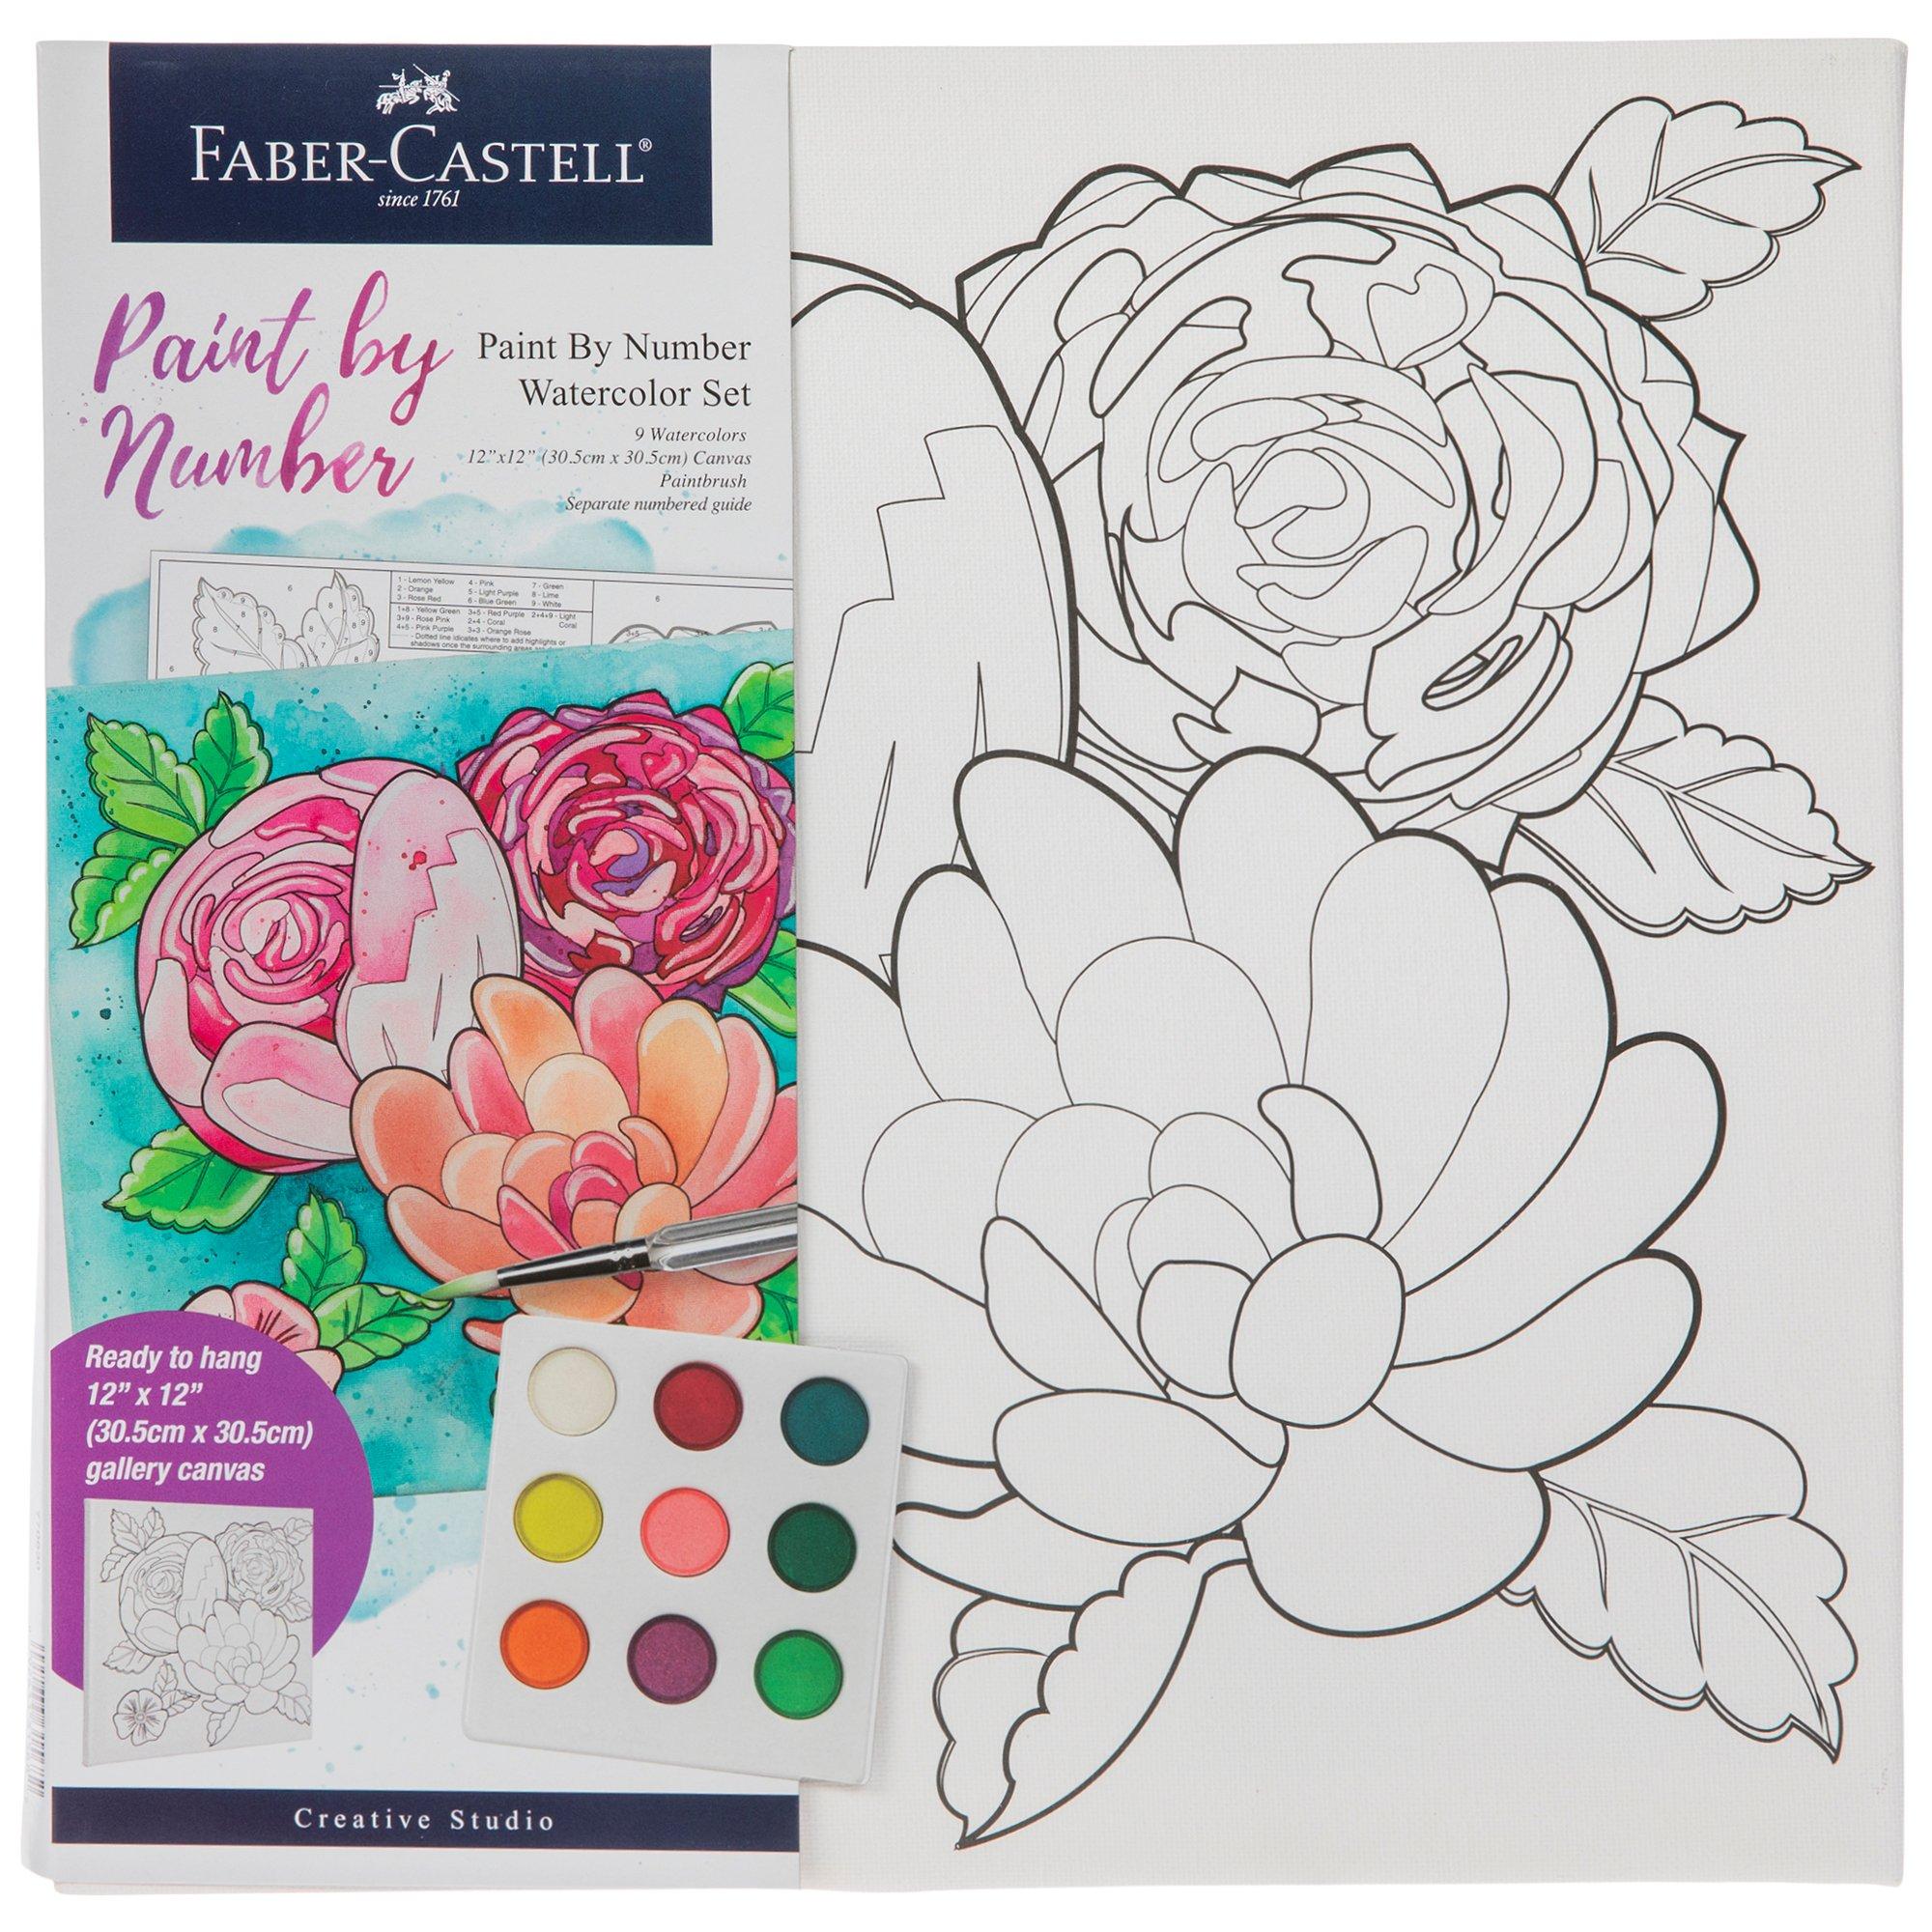 Faber-Castell Paint By Number Peace Kit - Watercolor Paint by